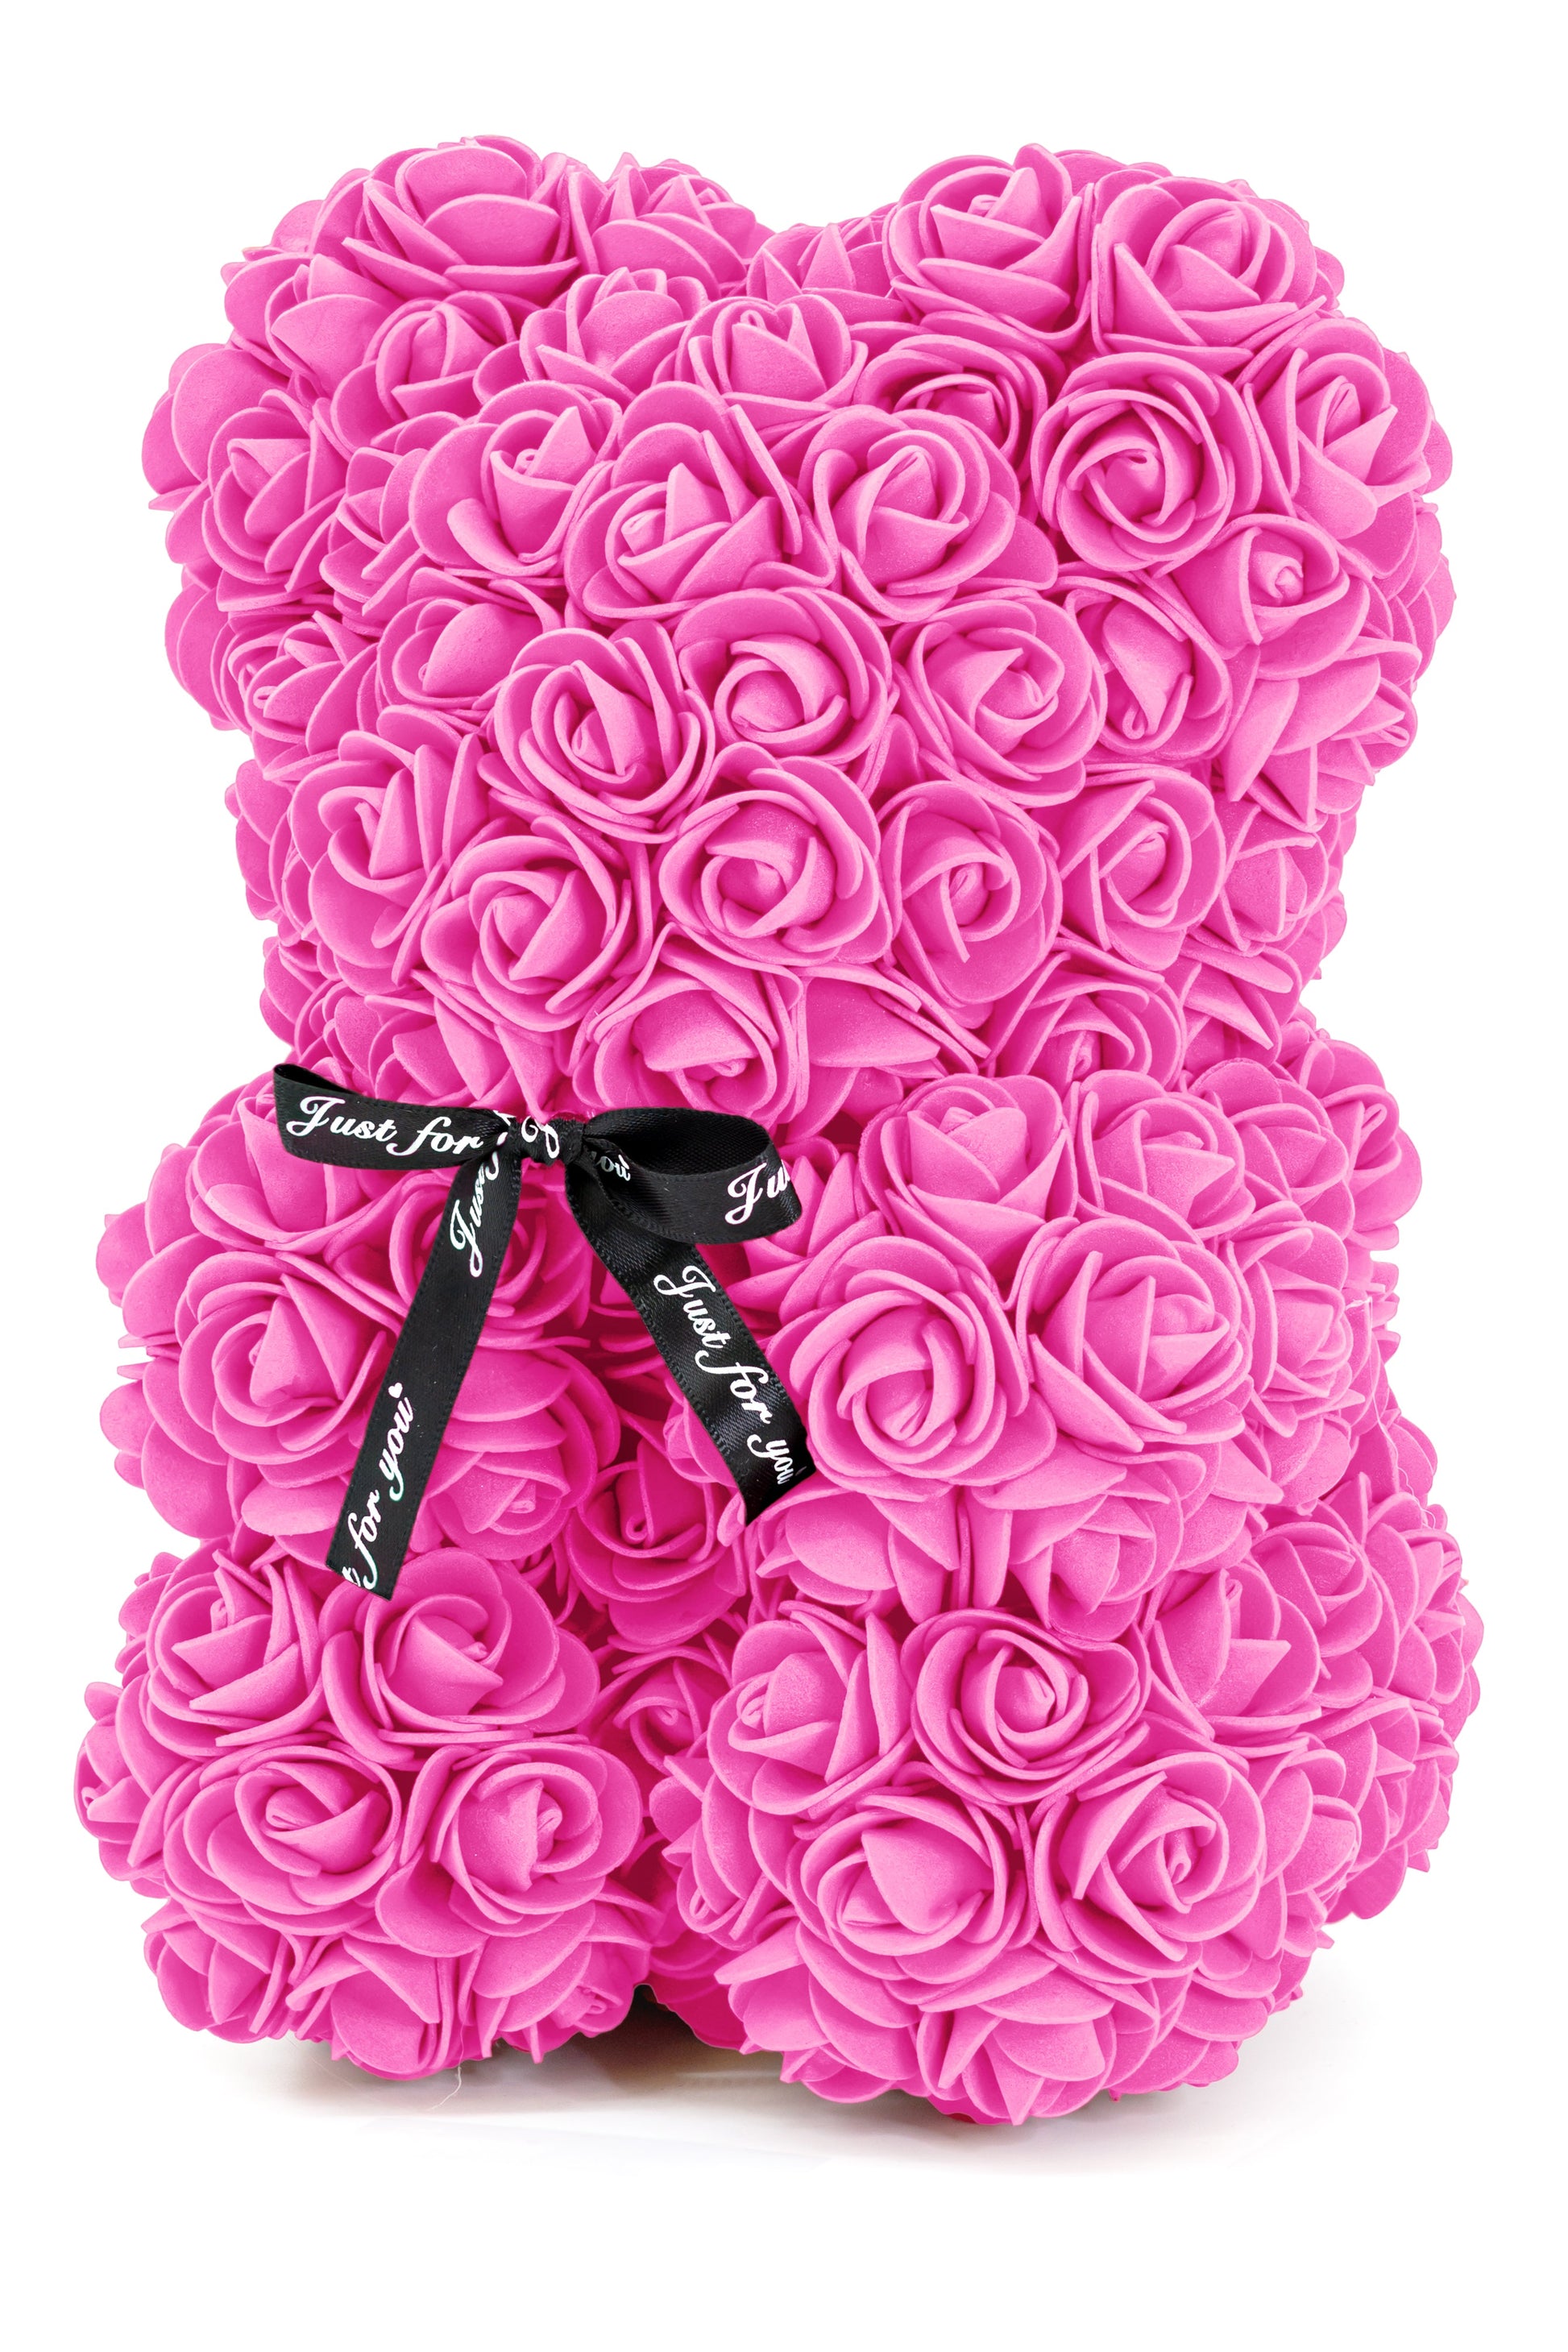 A front view of the bear shaped product covered in foam roses in the color of pink.